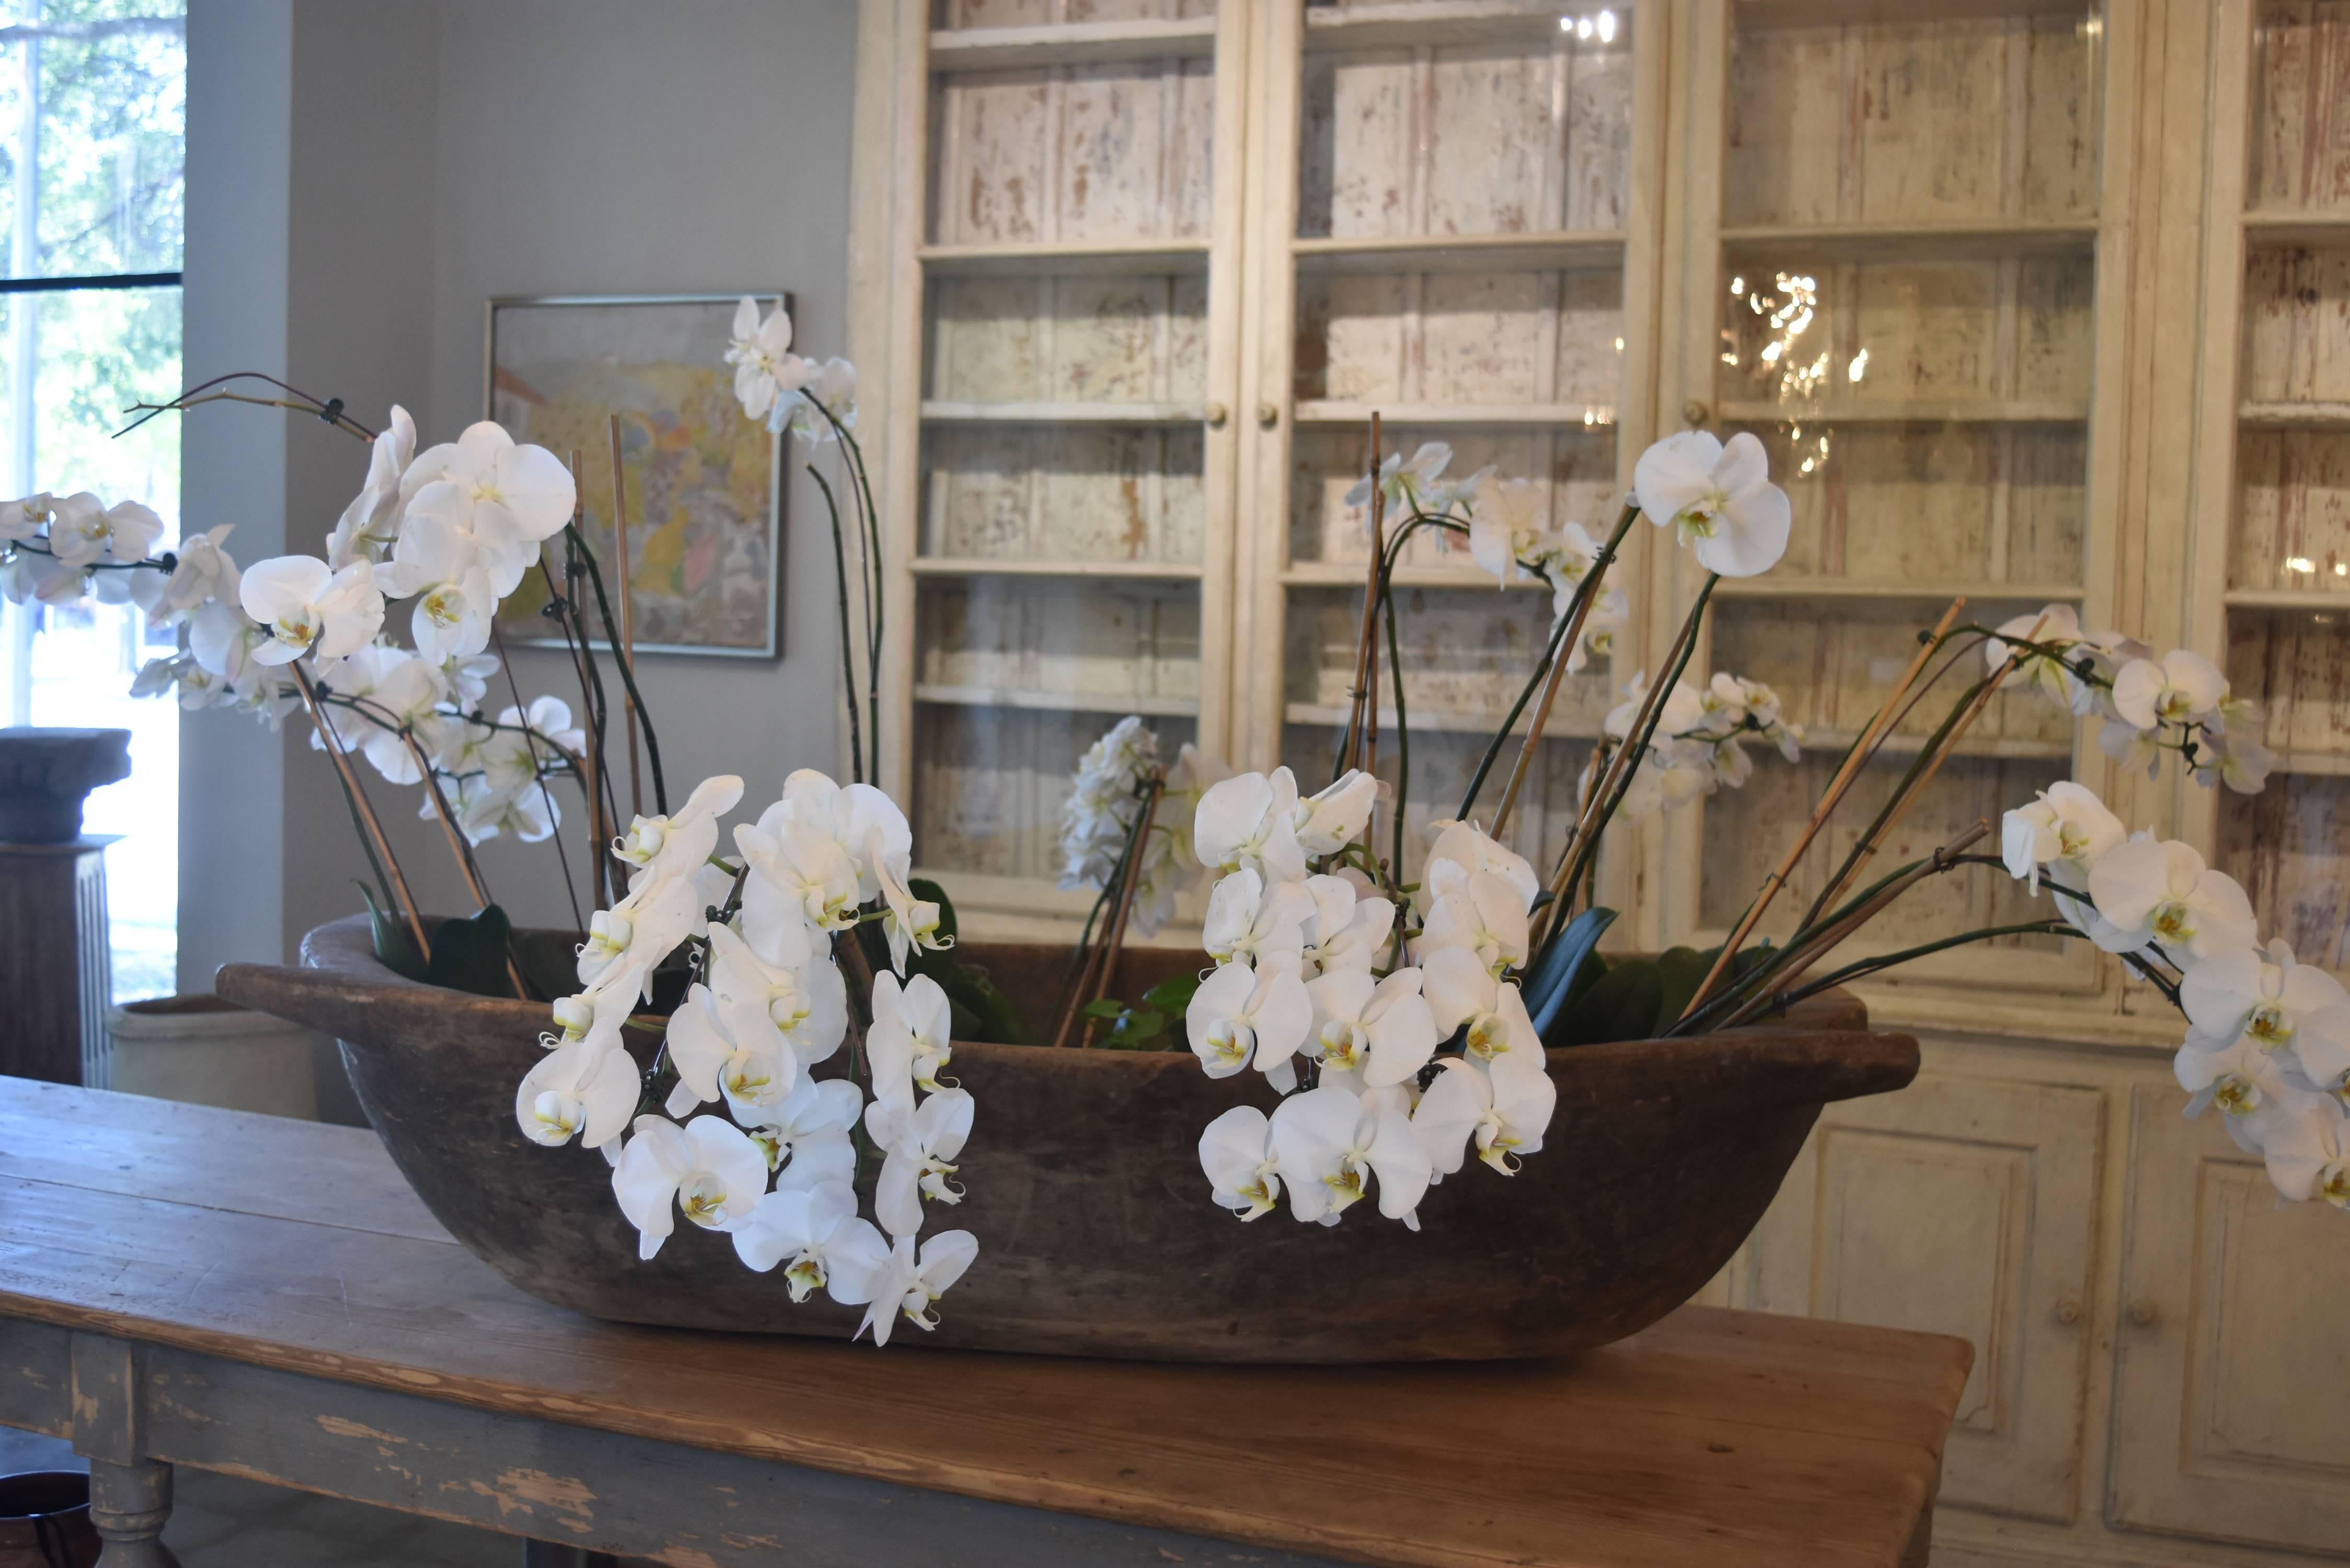 This is a really nice and very large wooden trough that I use for orchids. I usually put about 15 or so double orchids on a long table or counter and it's very impressive. This one originates from France. It has tons of character and a wonderful old